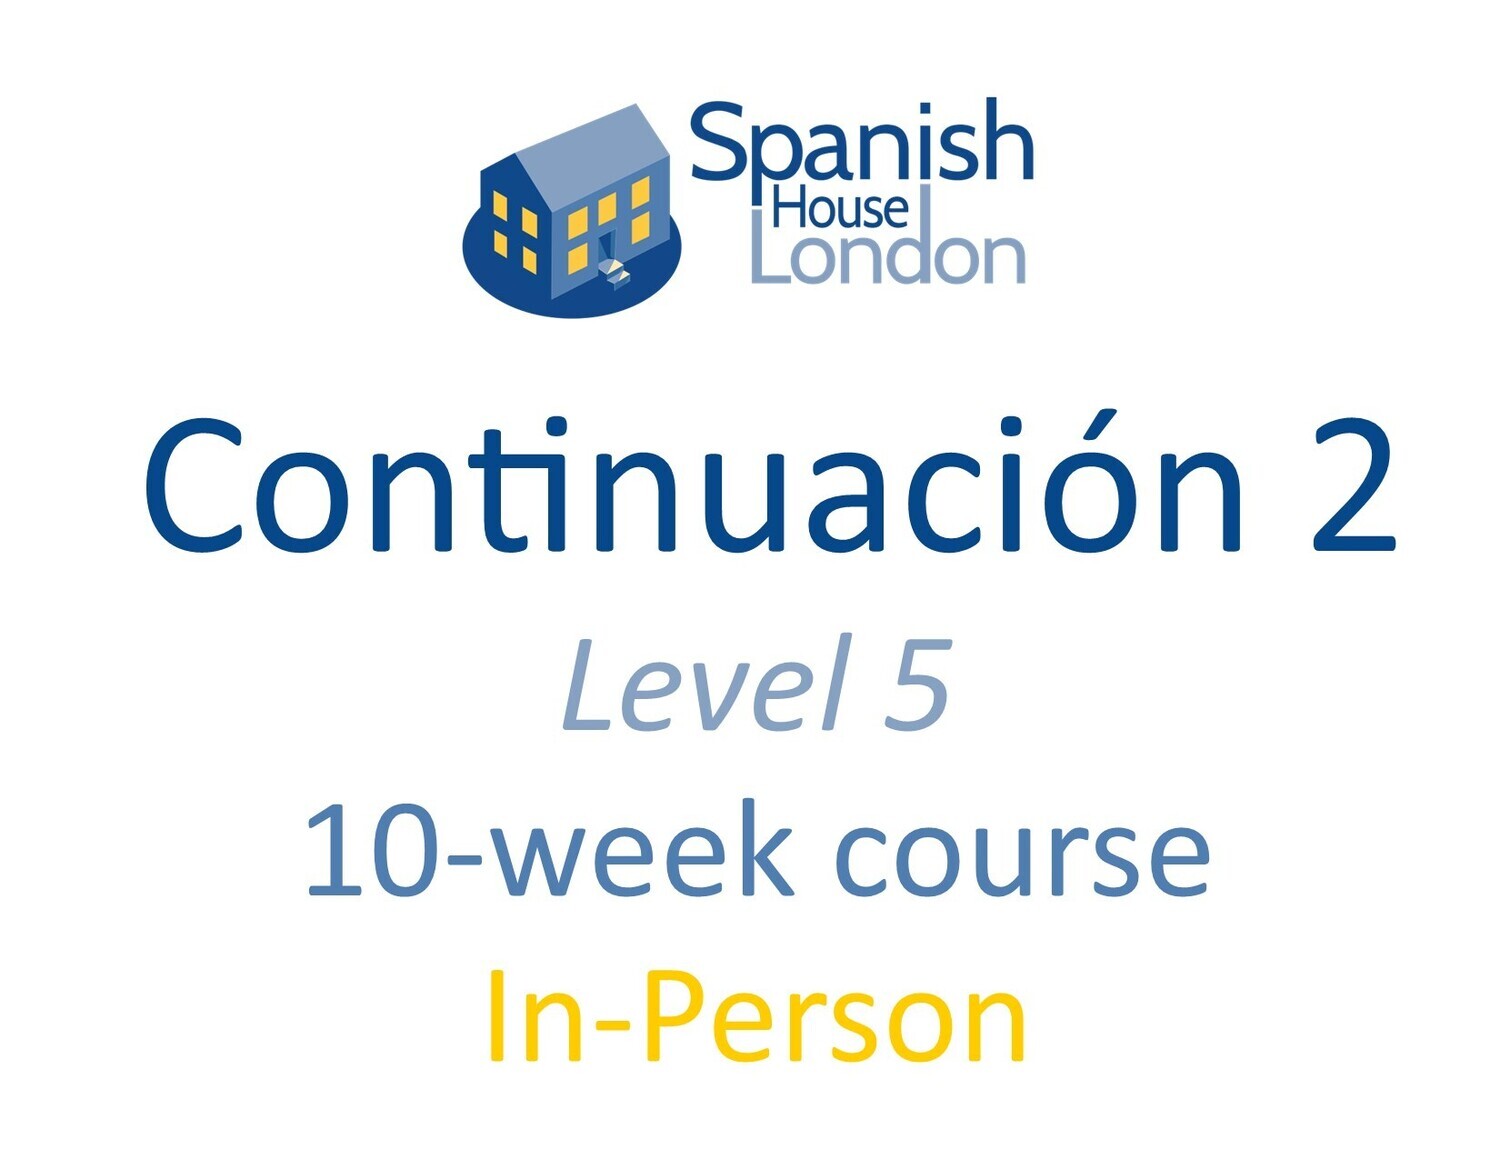 Continuacion 2 Course starting on 29th June at 7.30pm in Euston / King's Cross